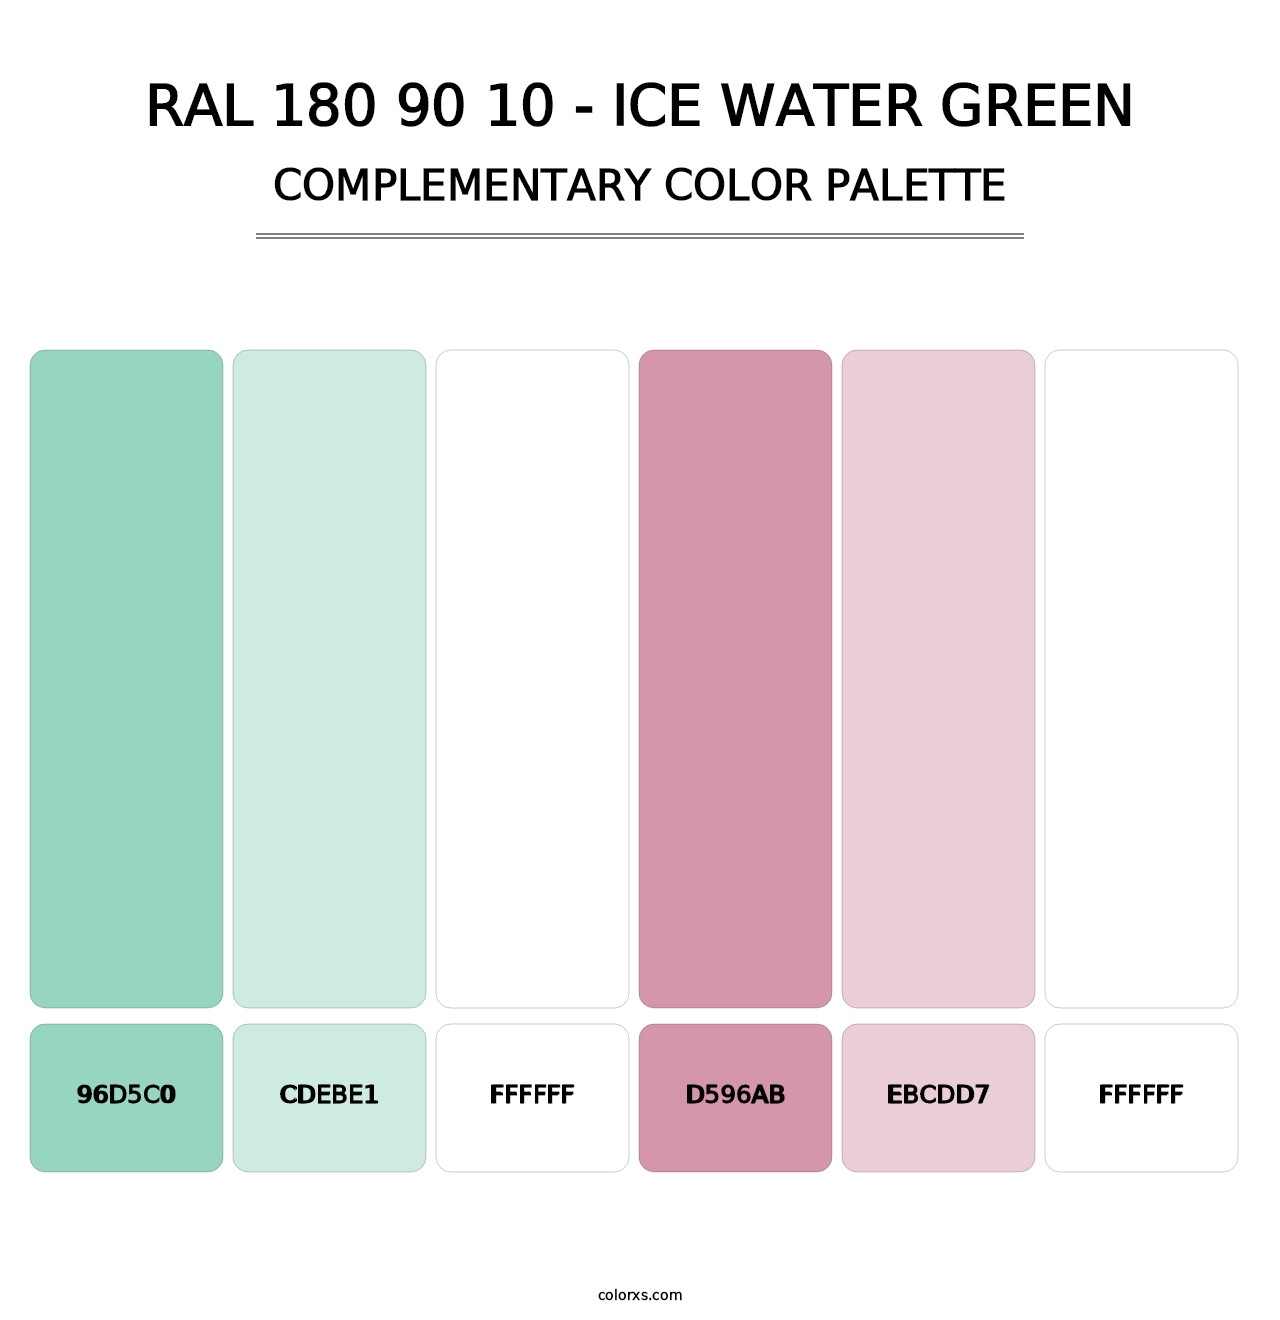 RAL 180 90 10 - Ice Water Green - Complementary Color Palette